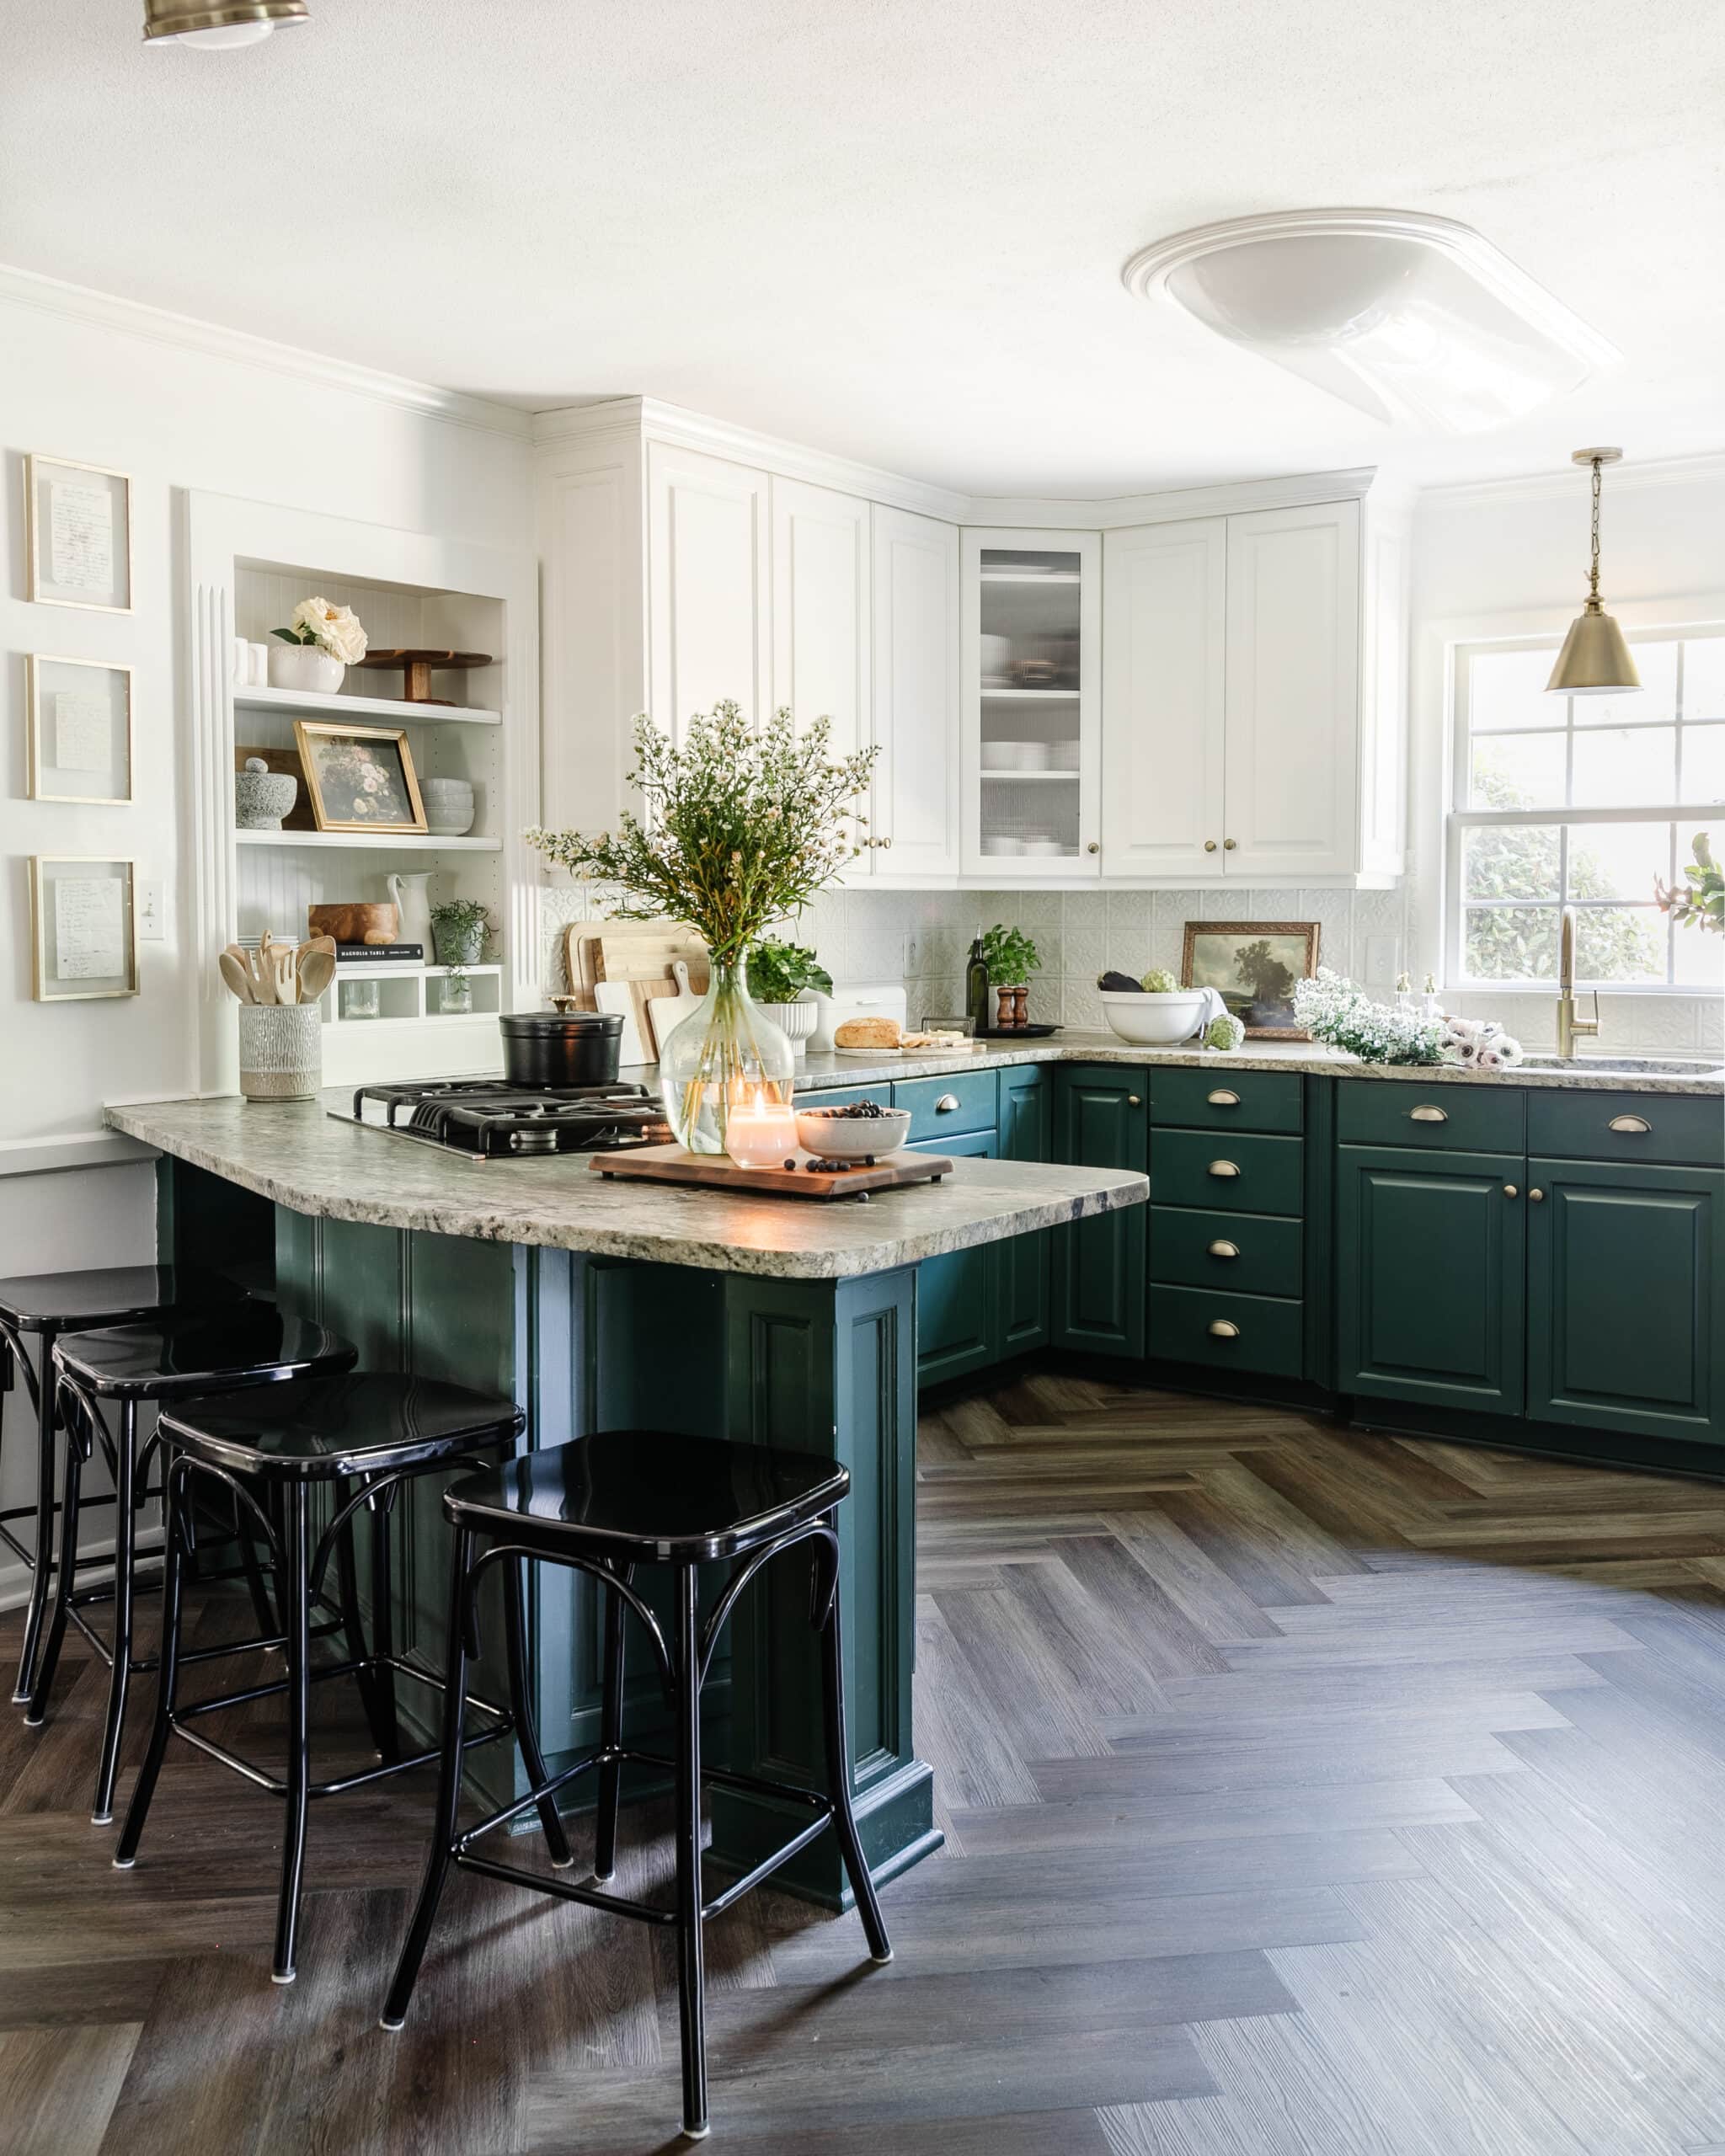 kitchen facelift with herringbone floors, green cabinets, and cottagecore style